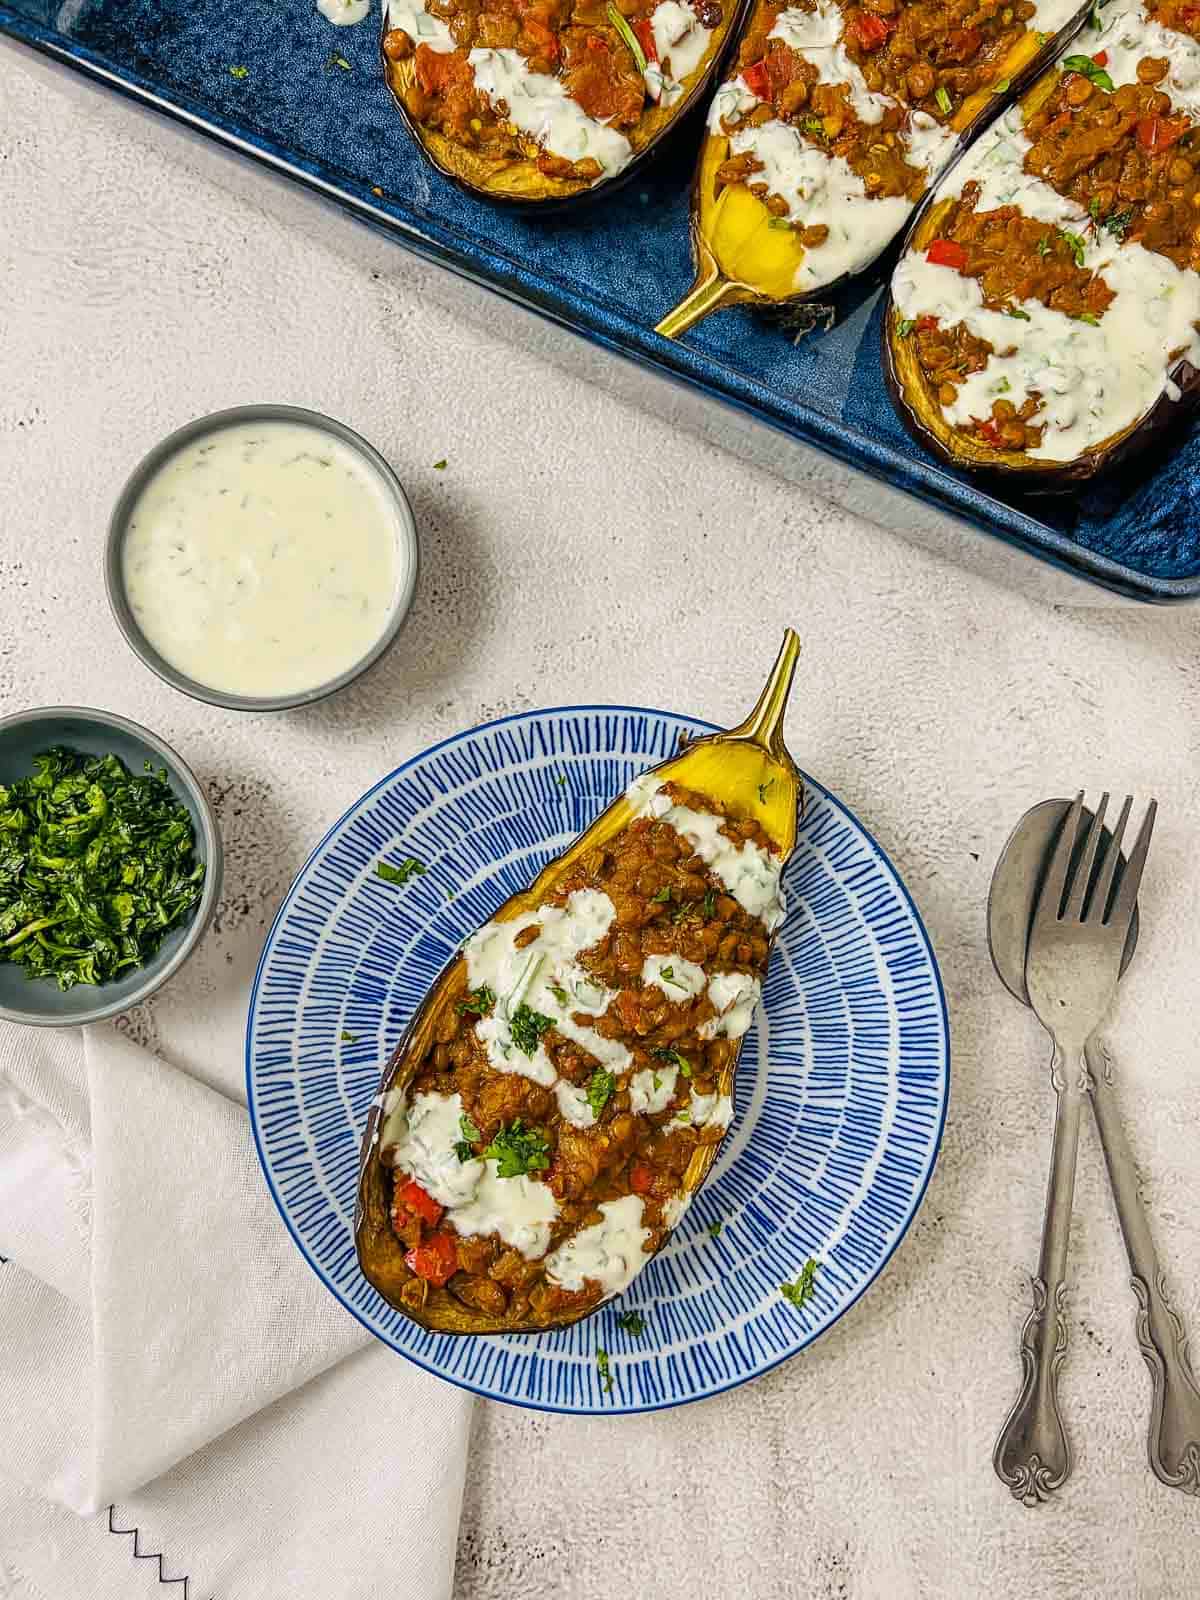 A slice of lentil stuffed eggplant on a blue plate with baking dish in the background.